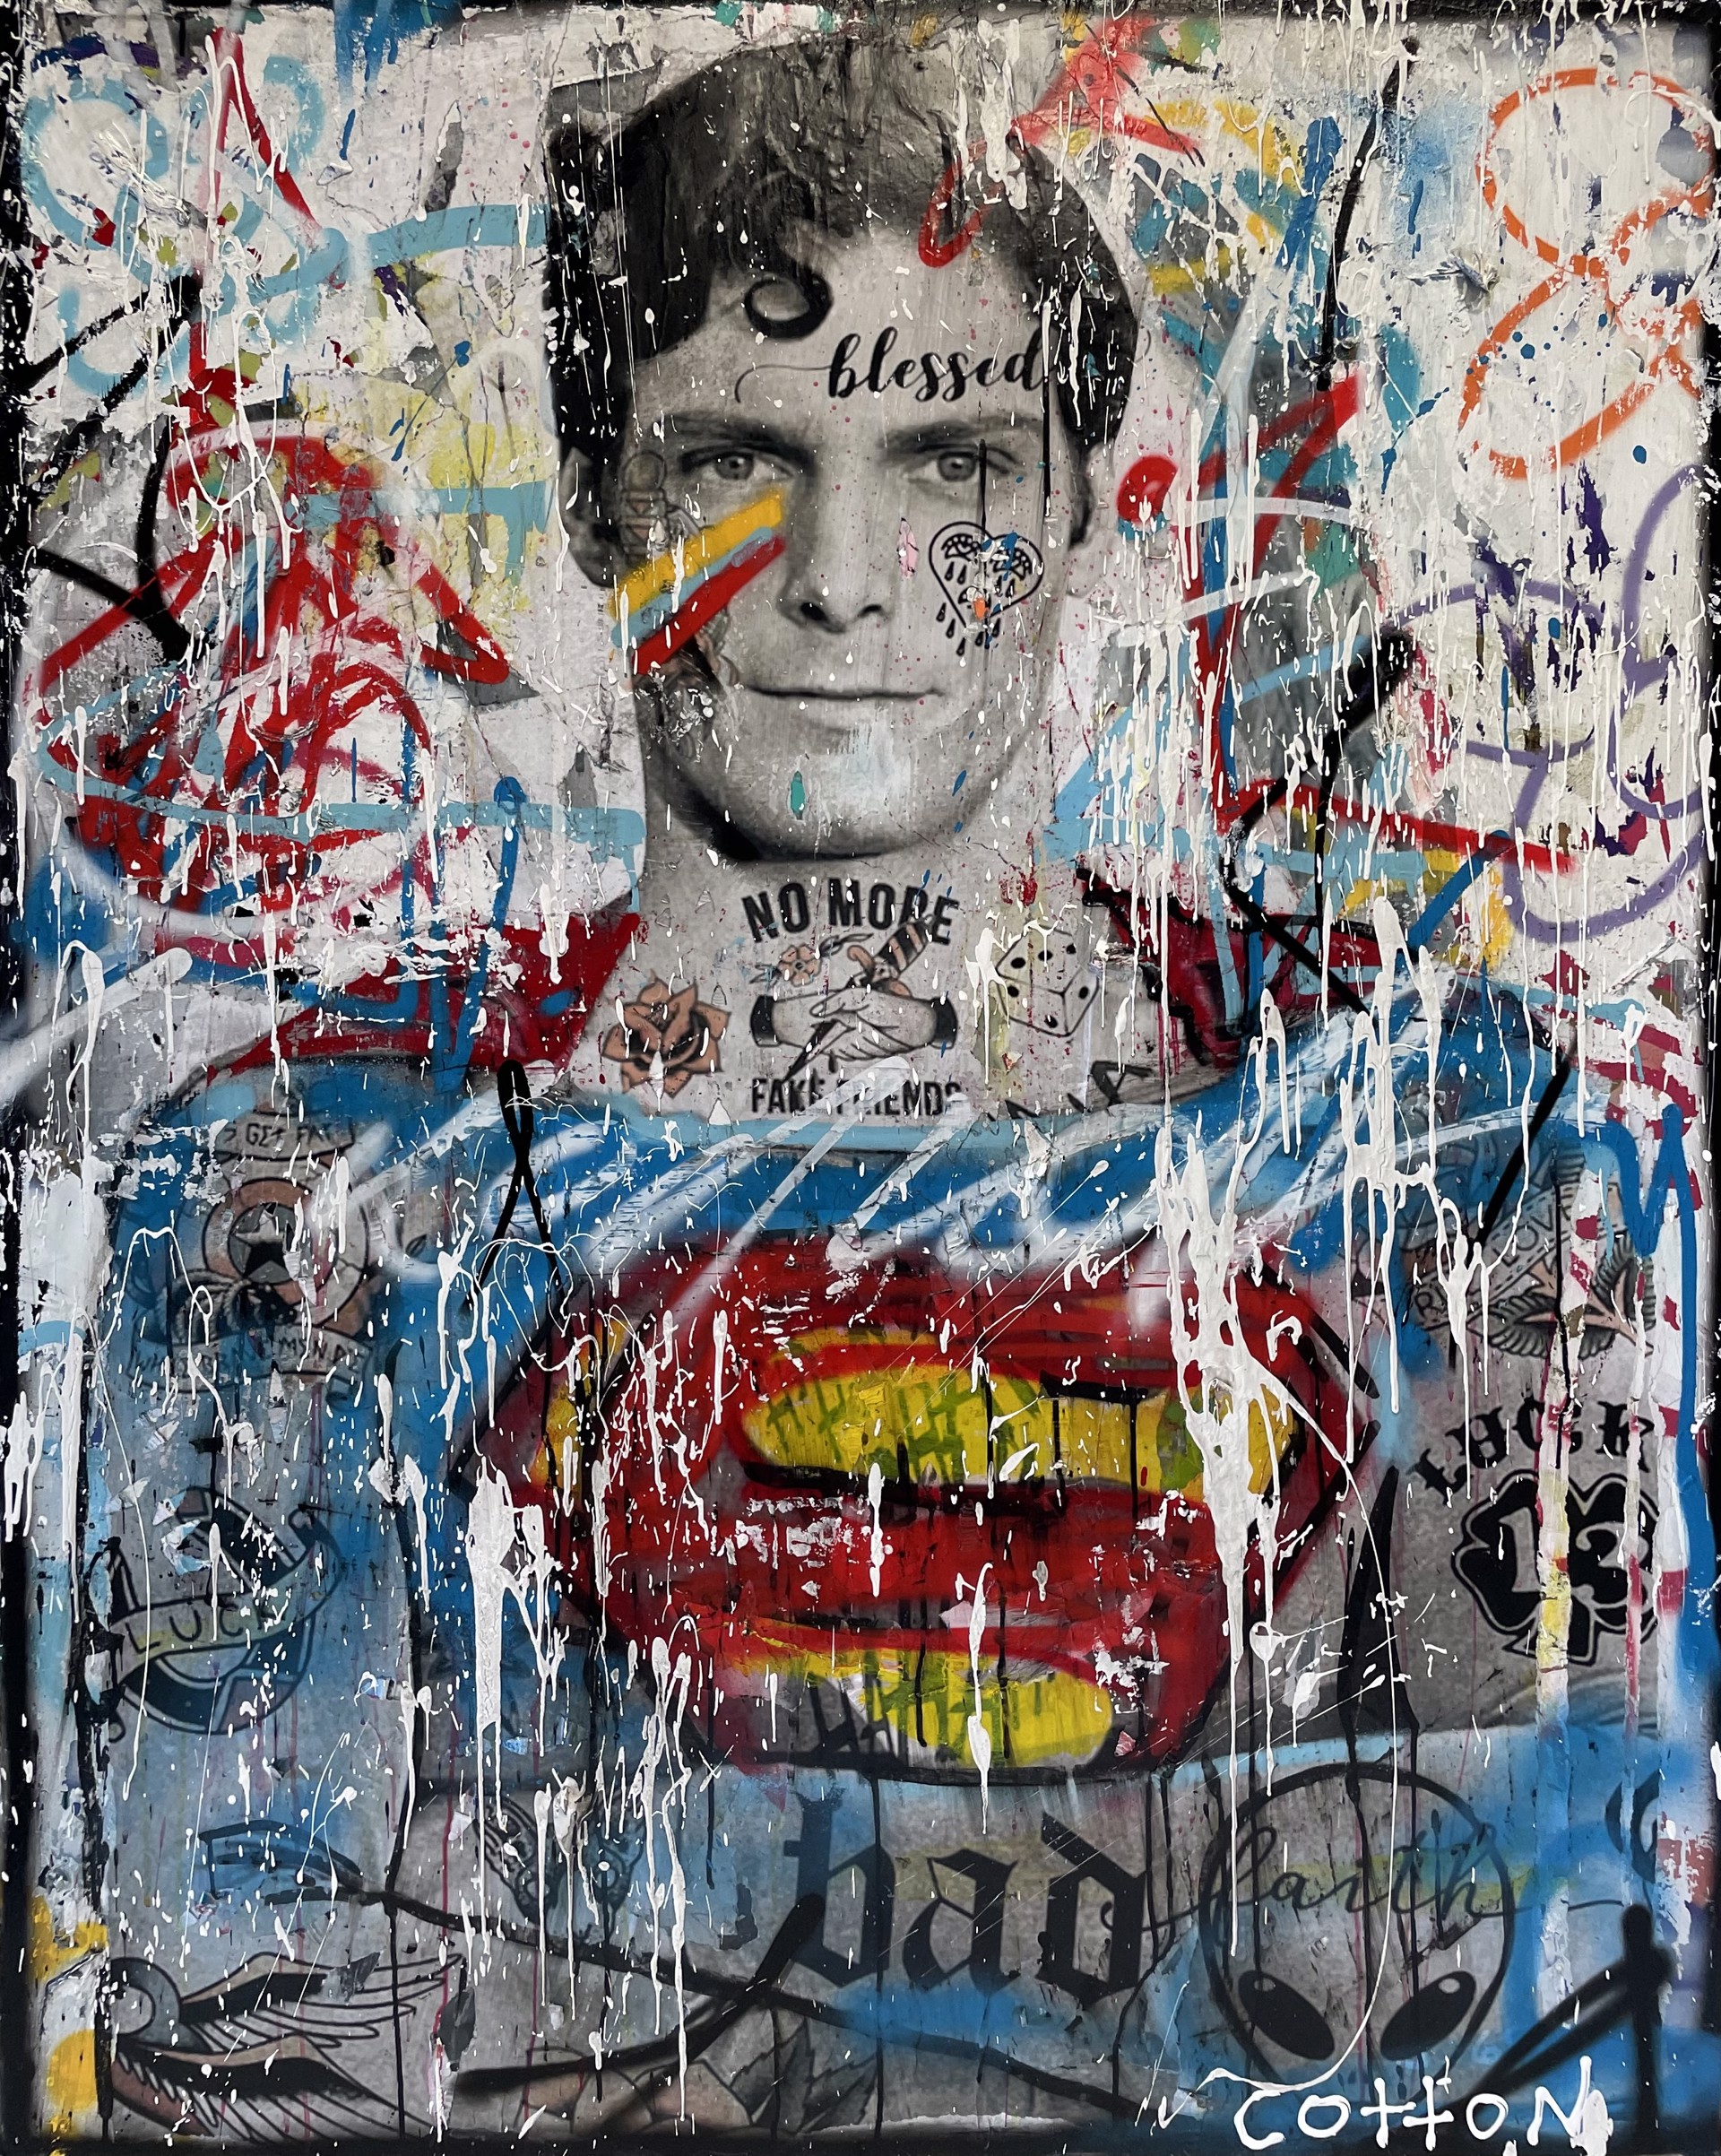 Superman (There Is A Superhero in All Of Us) by Andrew Cotton